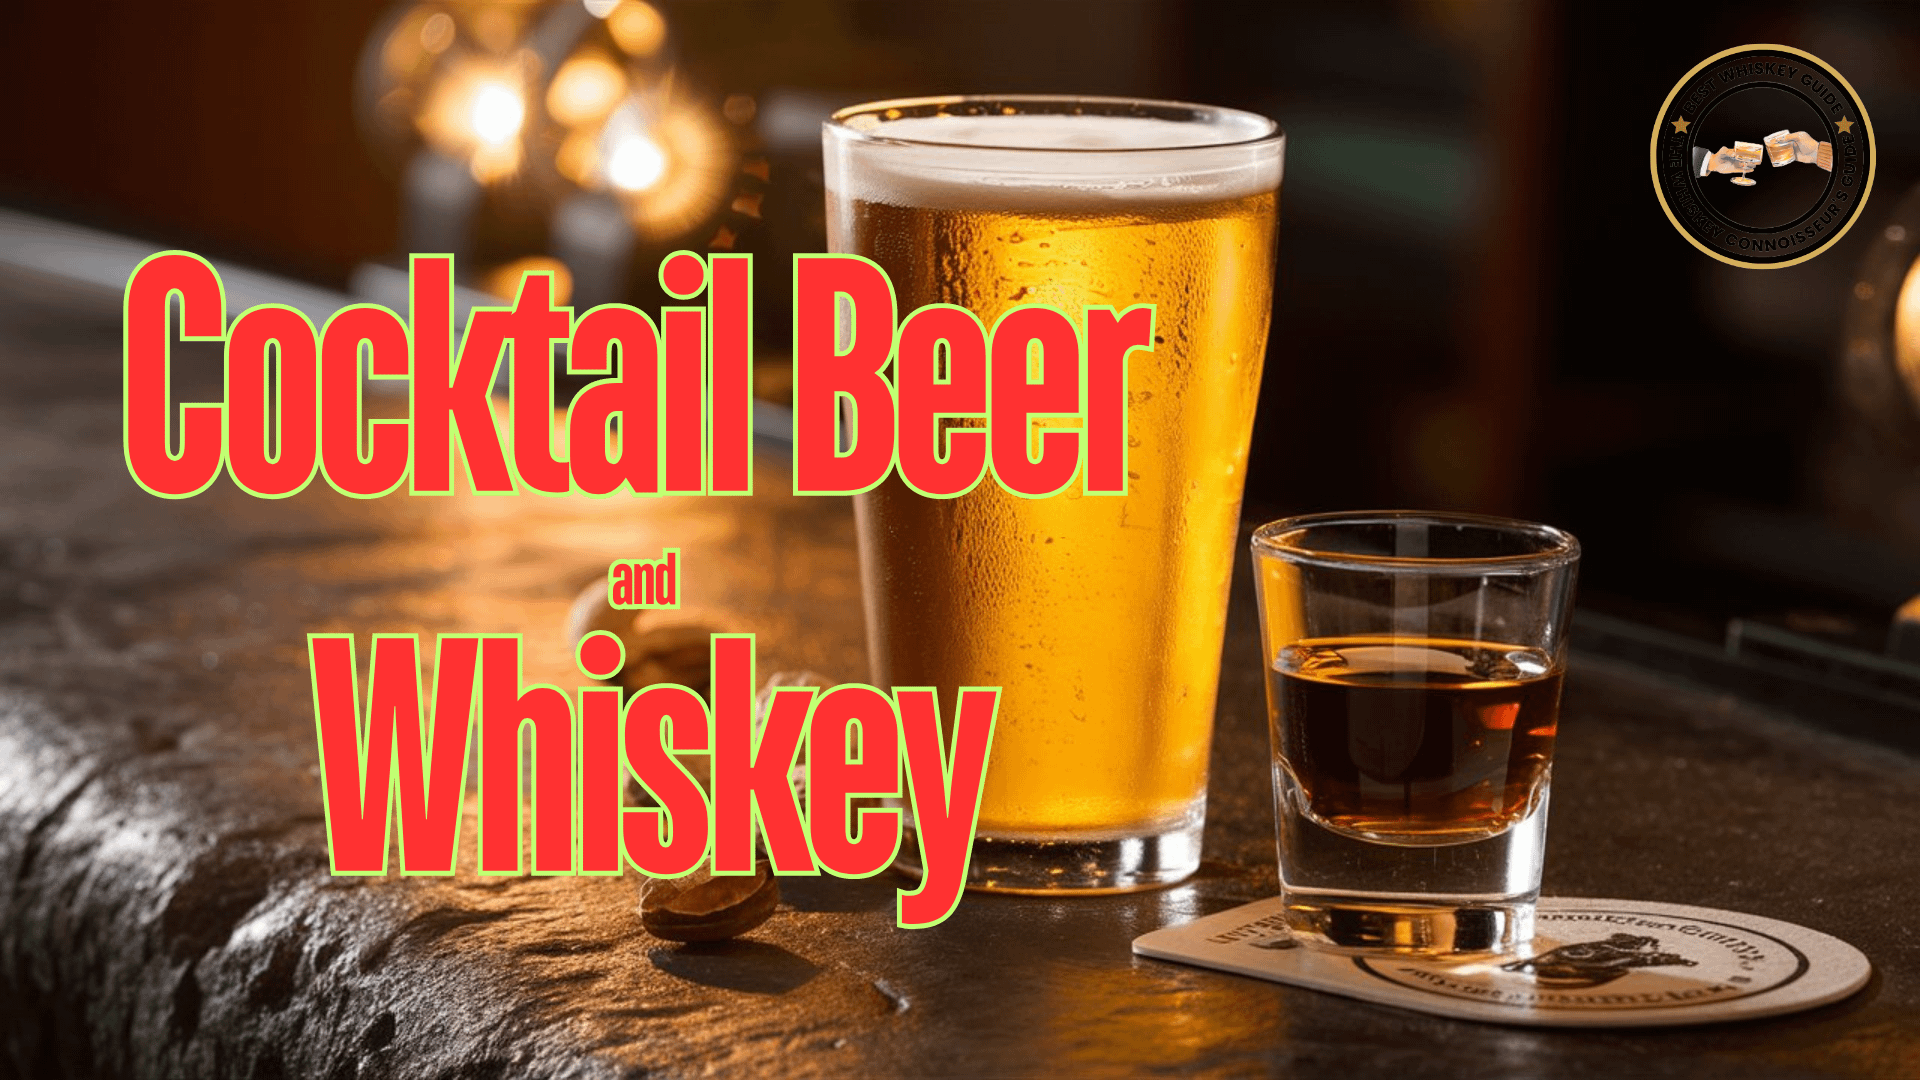 Cocktail Beer and Whiskey